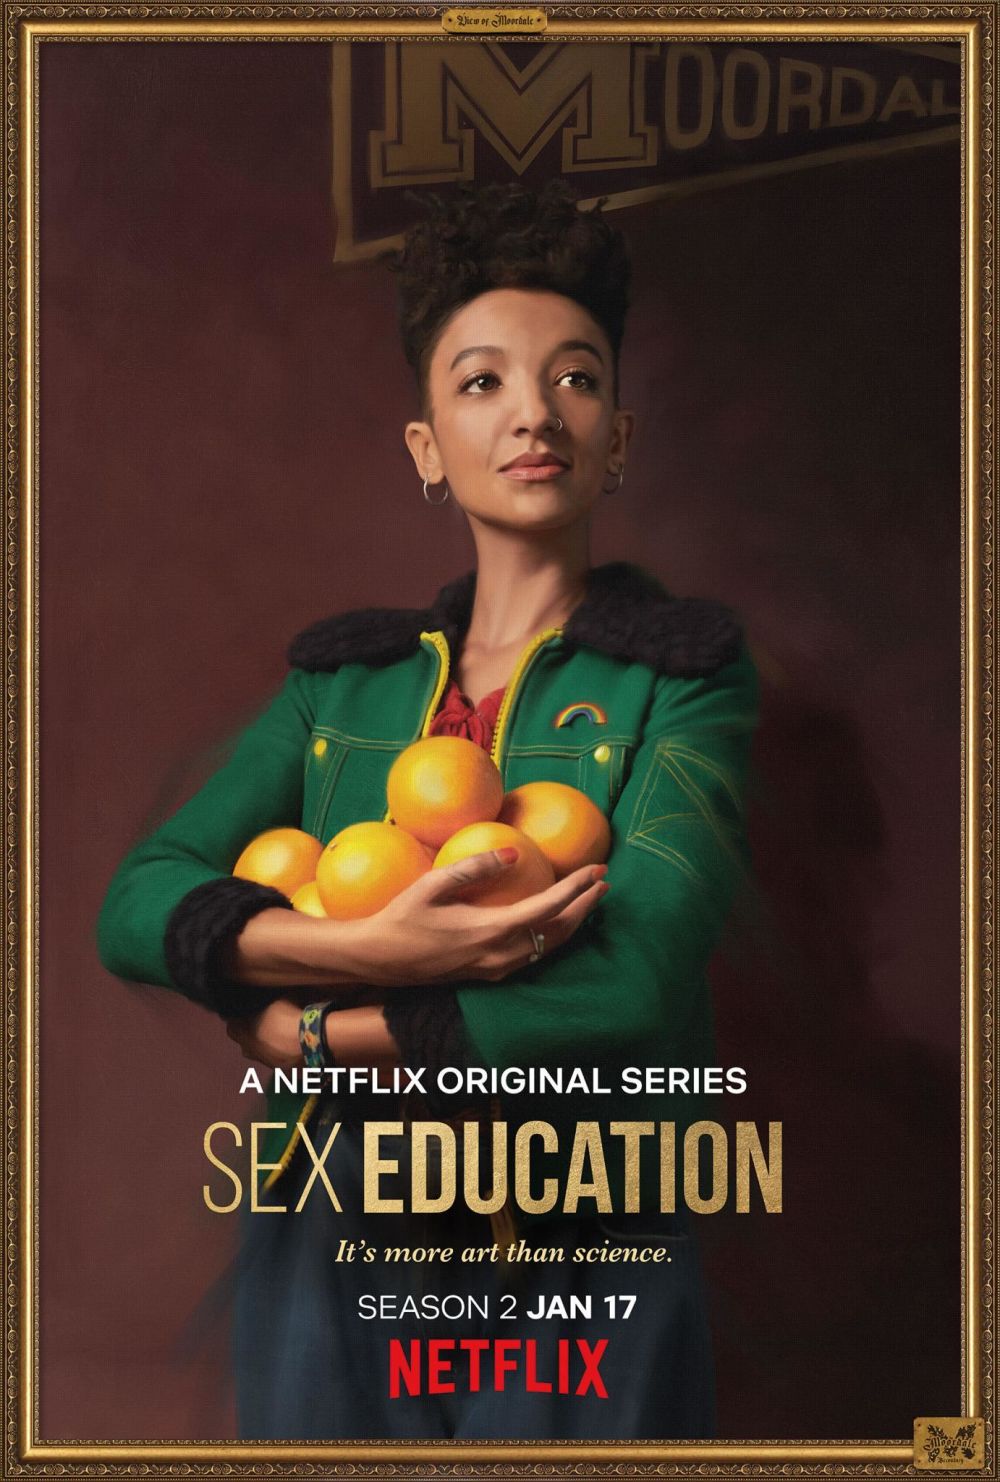 A promotional portrait of Maeve from the Netflix series, Sex Education, with an armful of oranges.